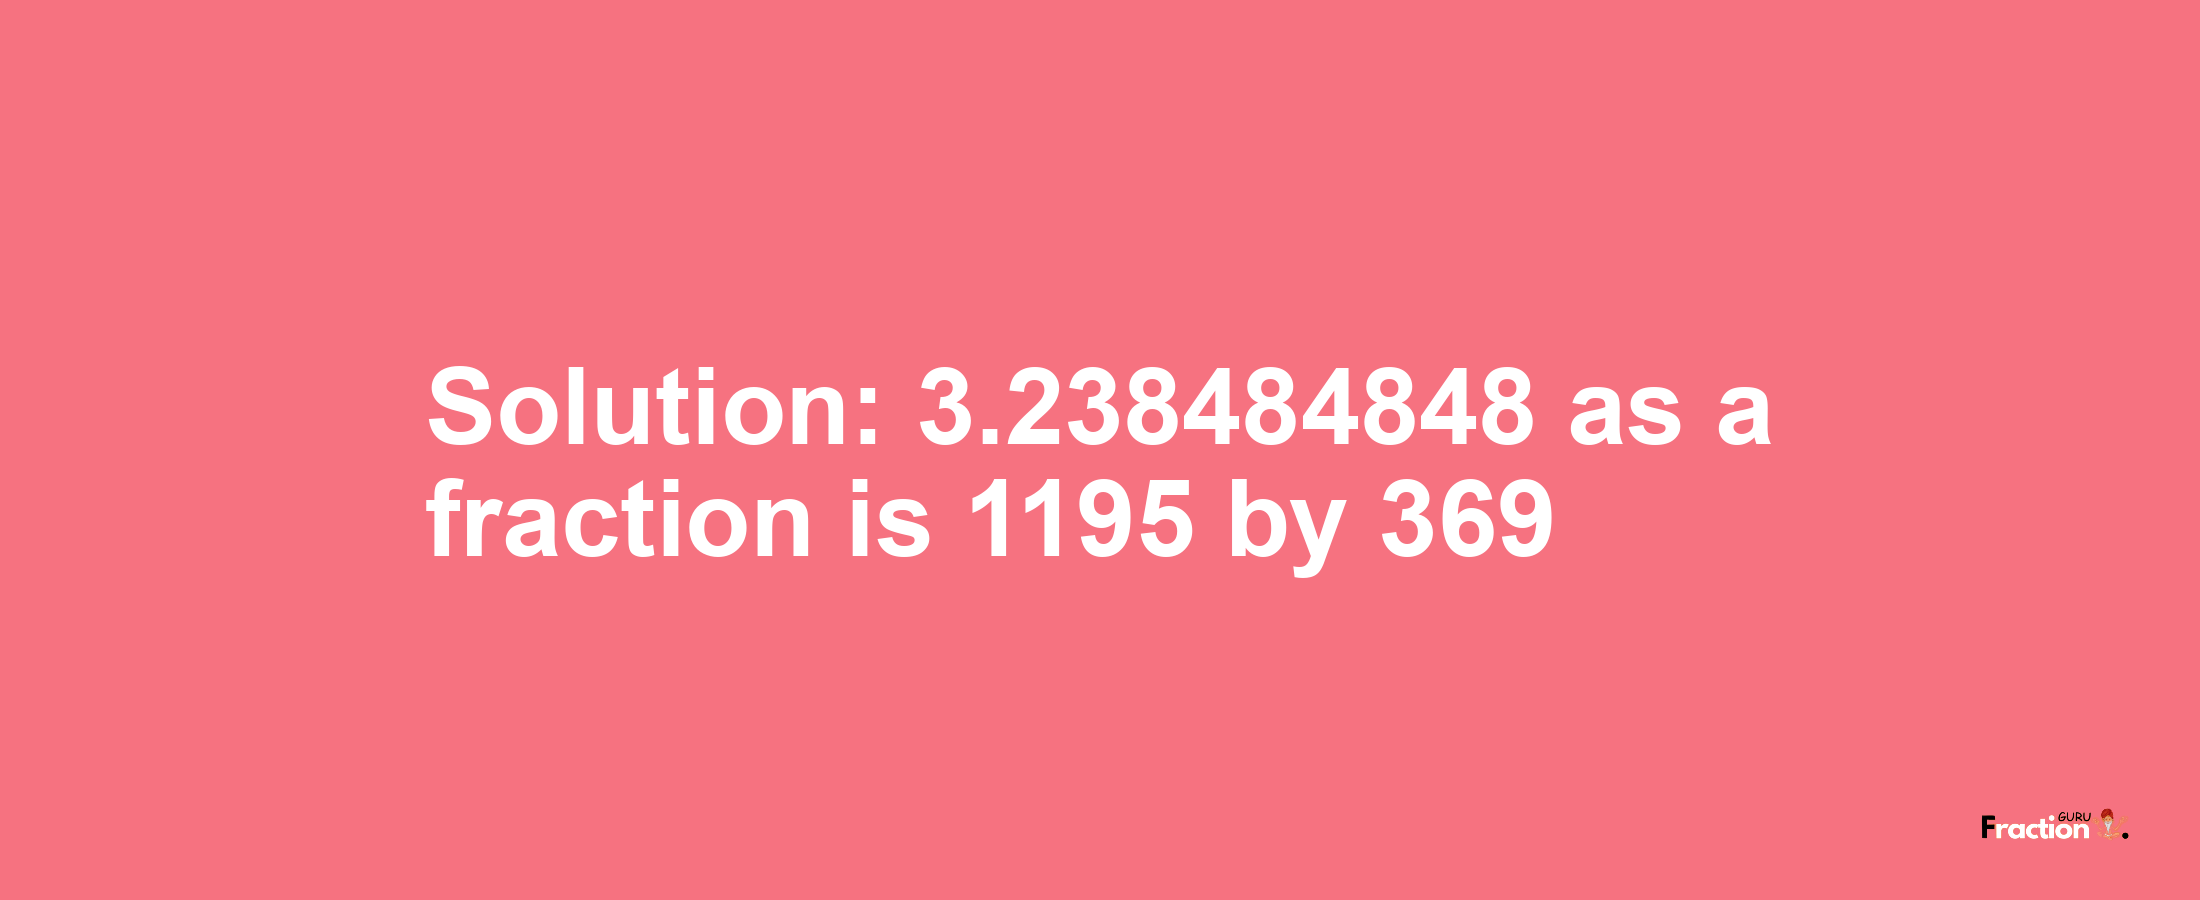 Solution:3.238484848 as a fraction is 1195/369